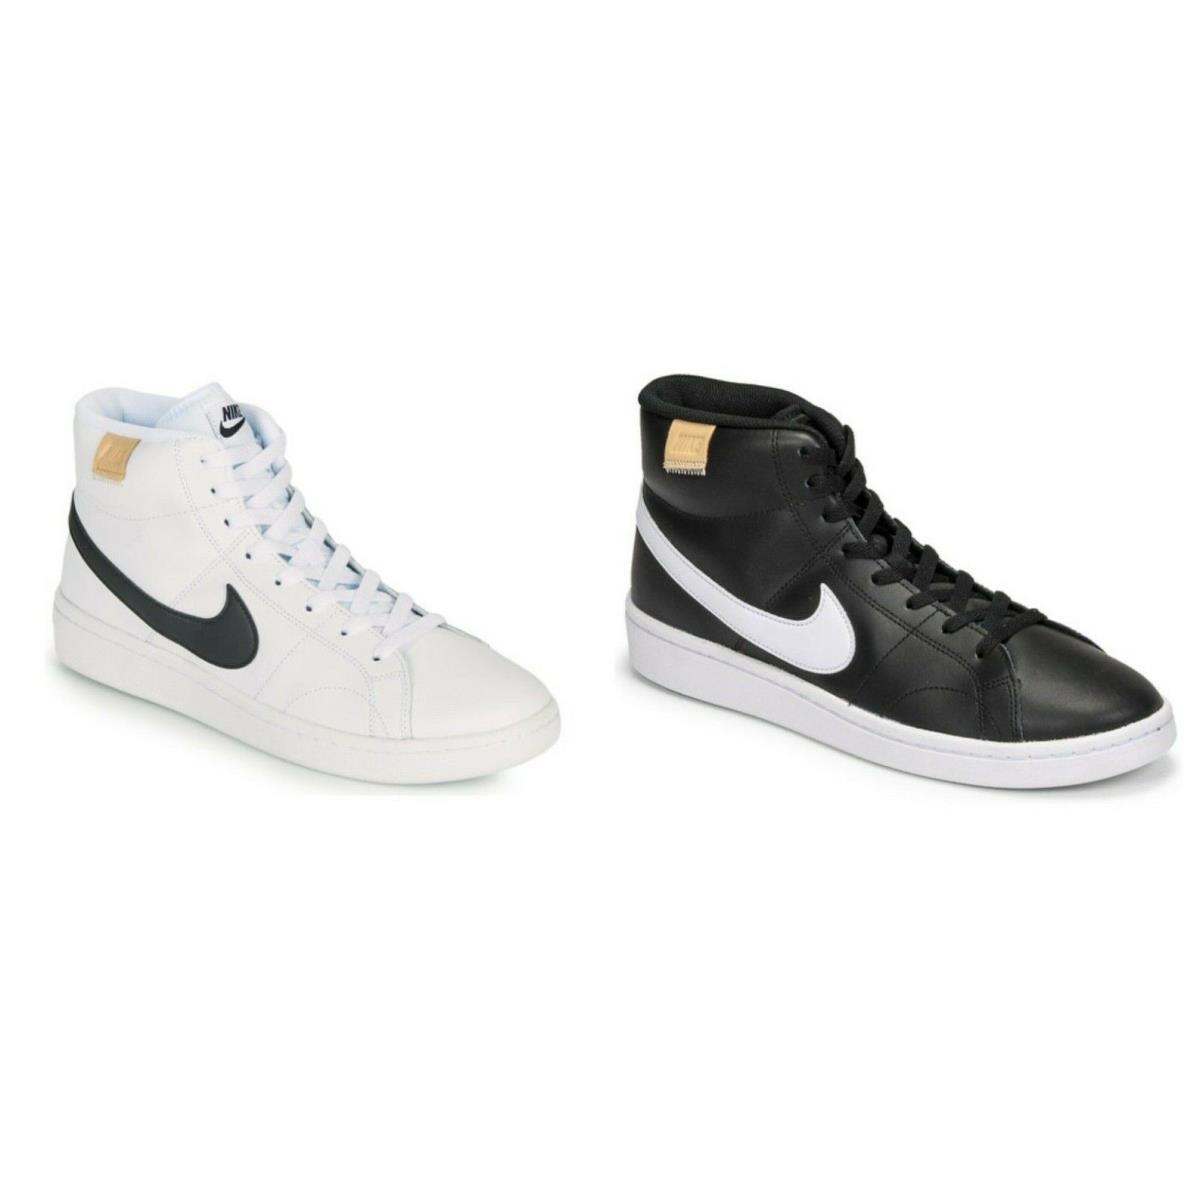 Dissipation Upstream Implement Nike Court Royale 2 Mid Top Men`s Sneakers Casual Retro 80`s Shoes |  883212583376 - Nike shoes Court Royale - Black | SporTipTop